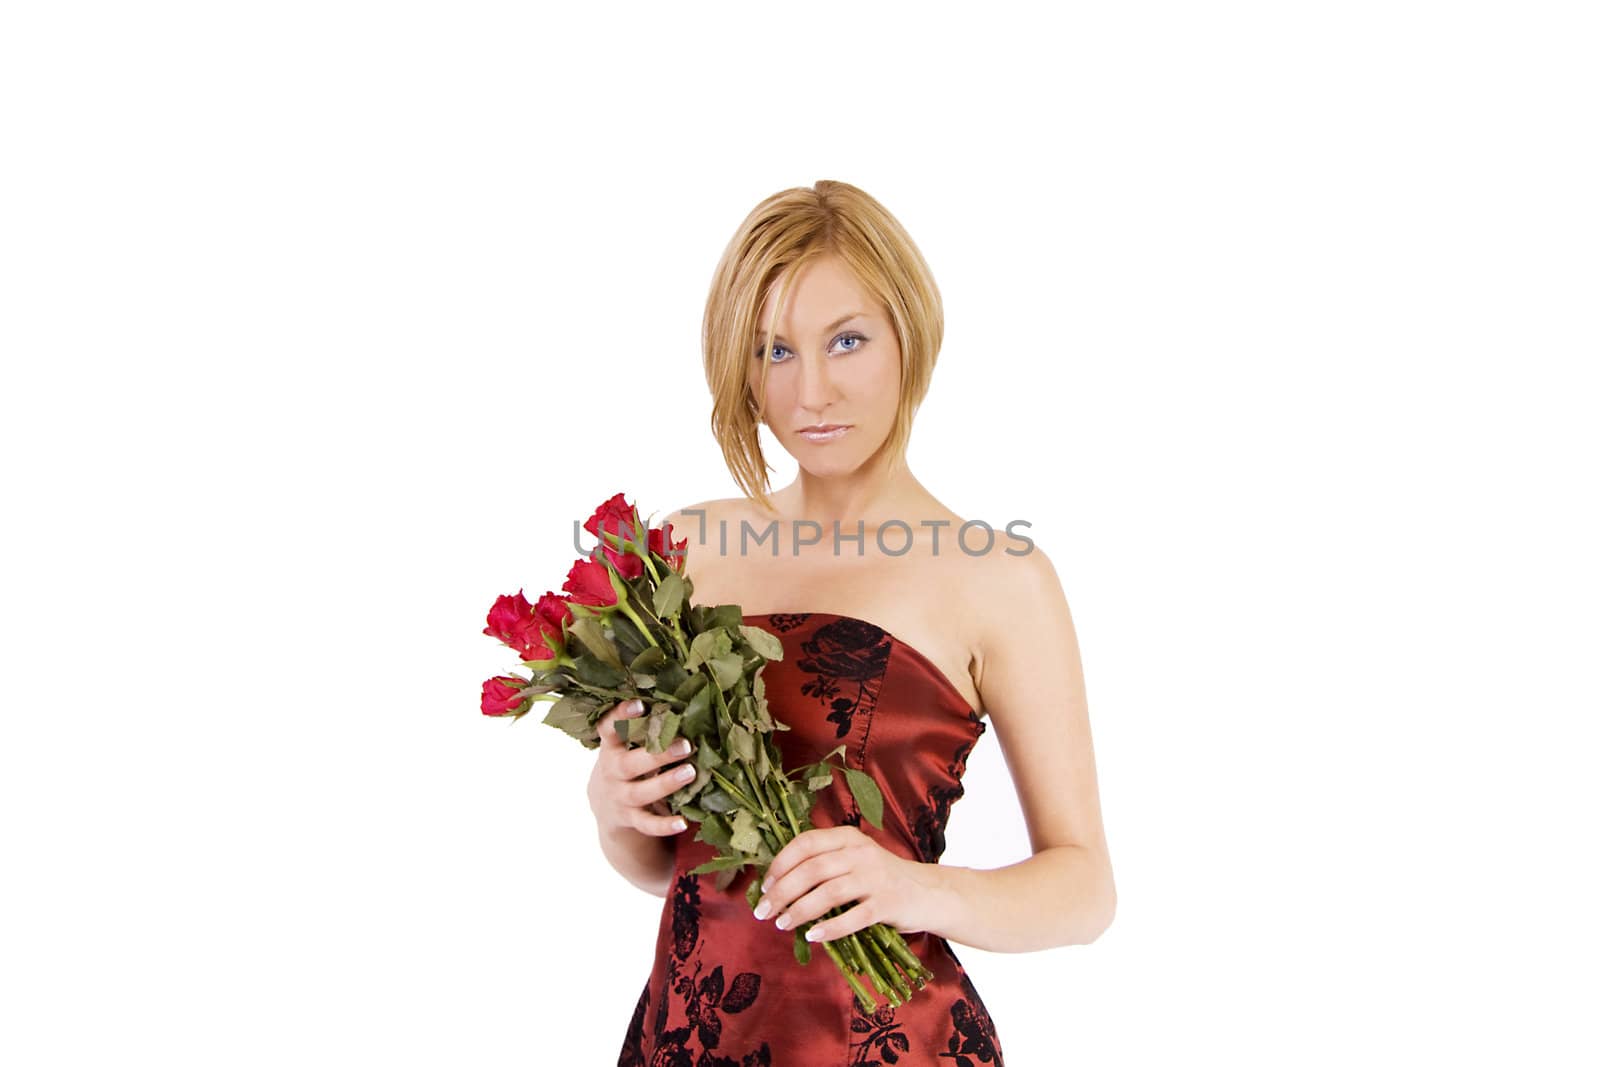 A blond woman with a red party dress and holding a buket of roses.